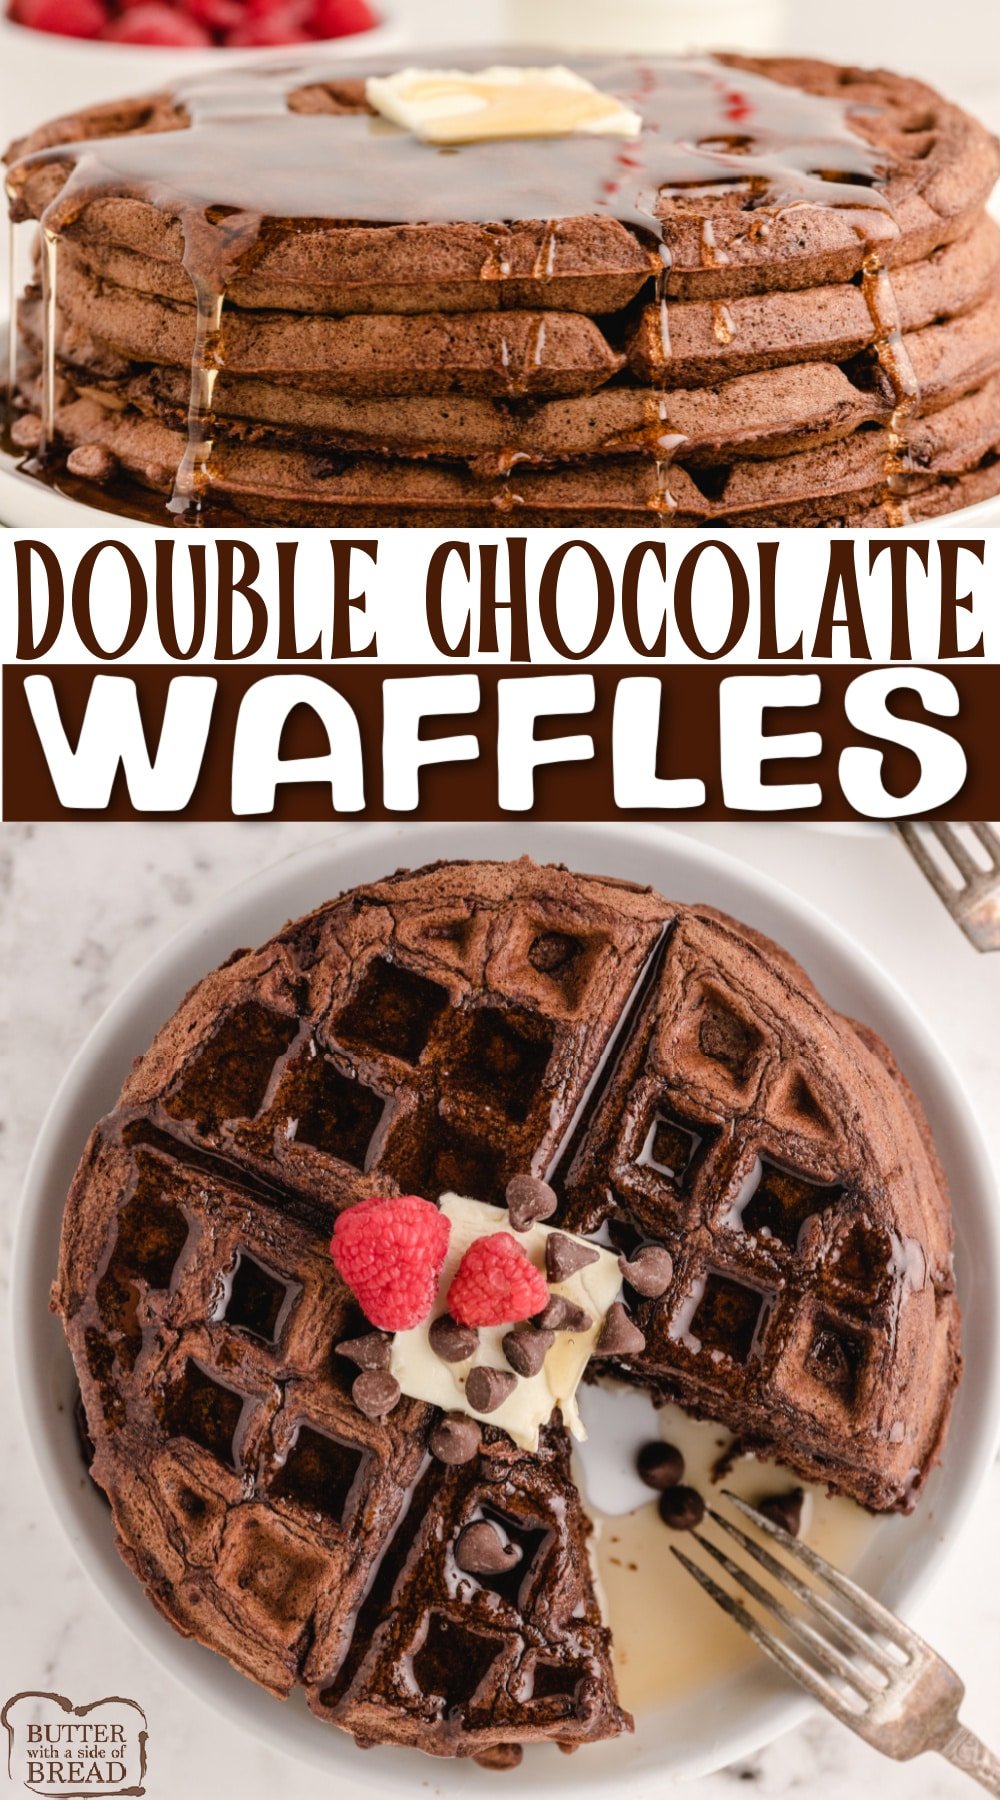 Double Chocolate Waffles made completely from scratch with cocoa powder and chocolate chips. Perfect waffle recipe for breakfast or dessert!